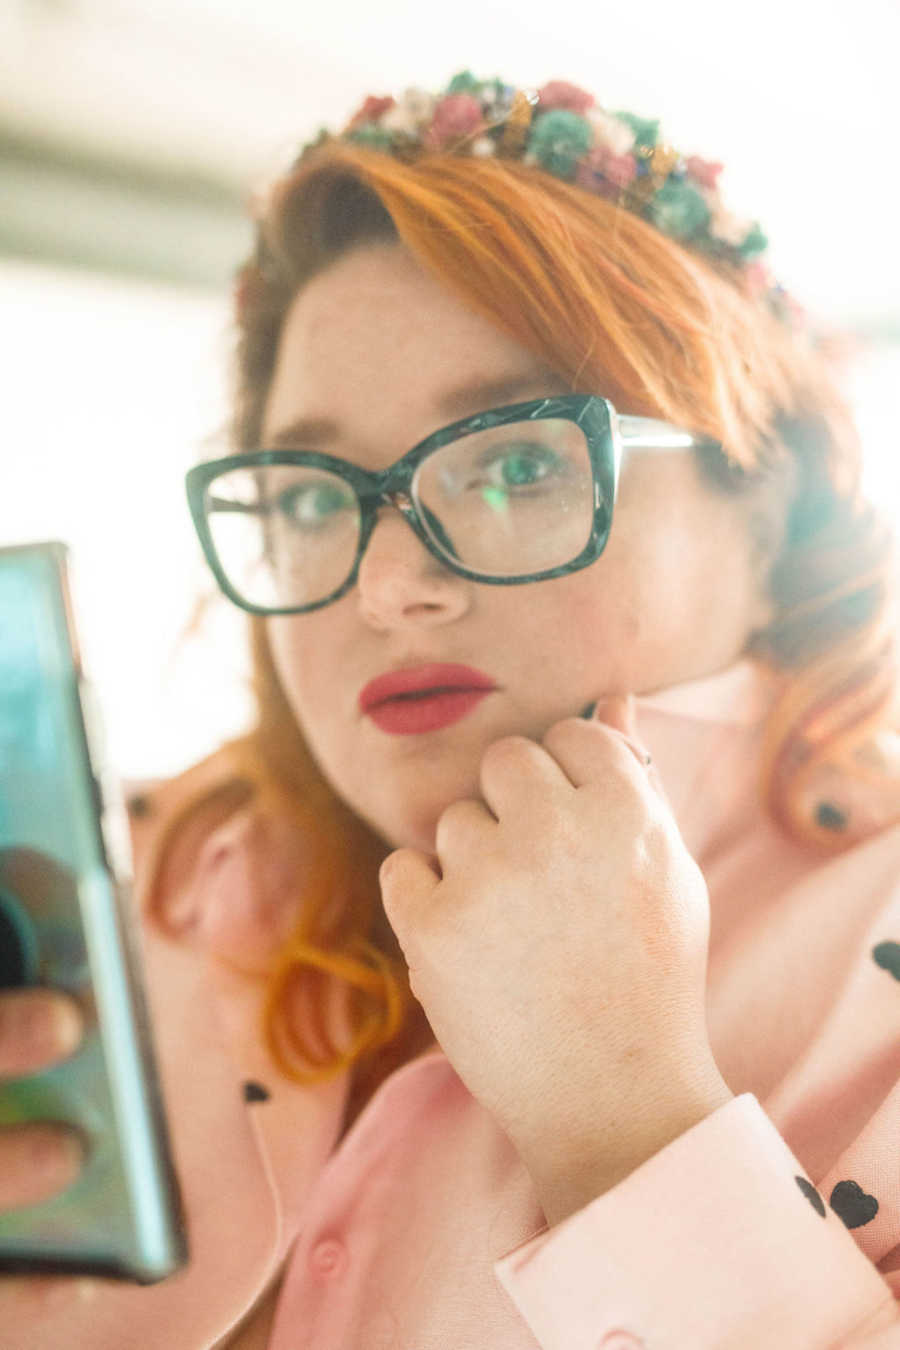 Redhead woman with glasses wearing flower crown